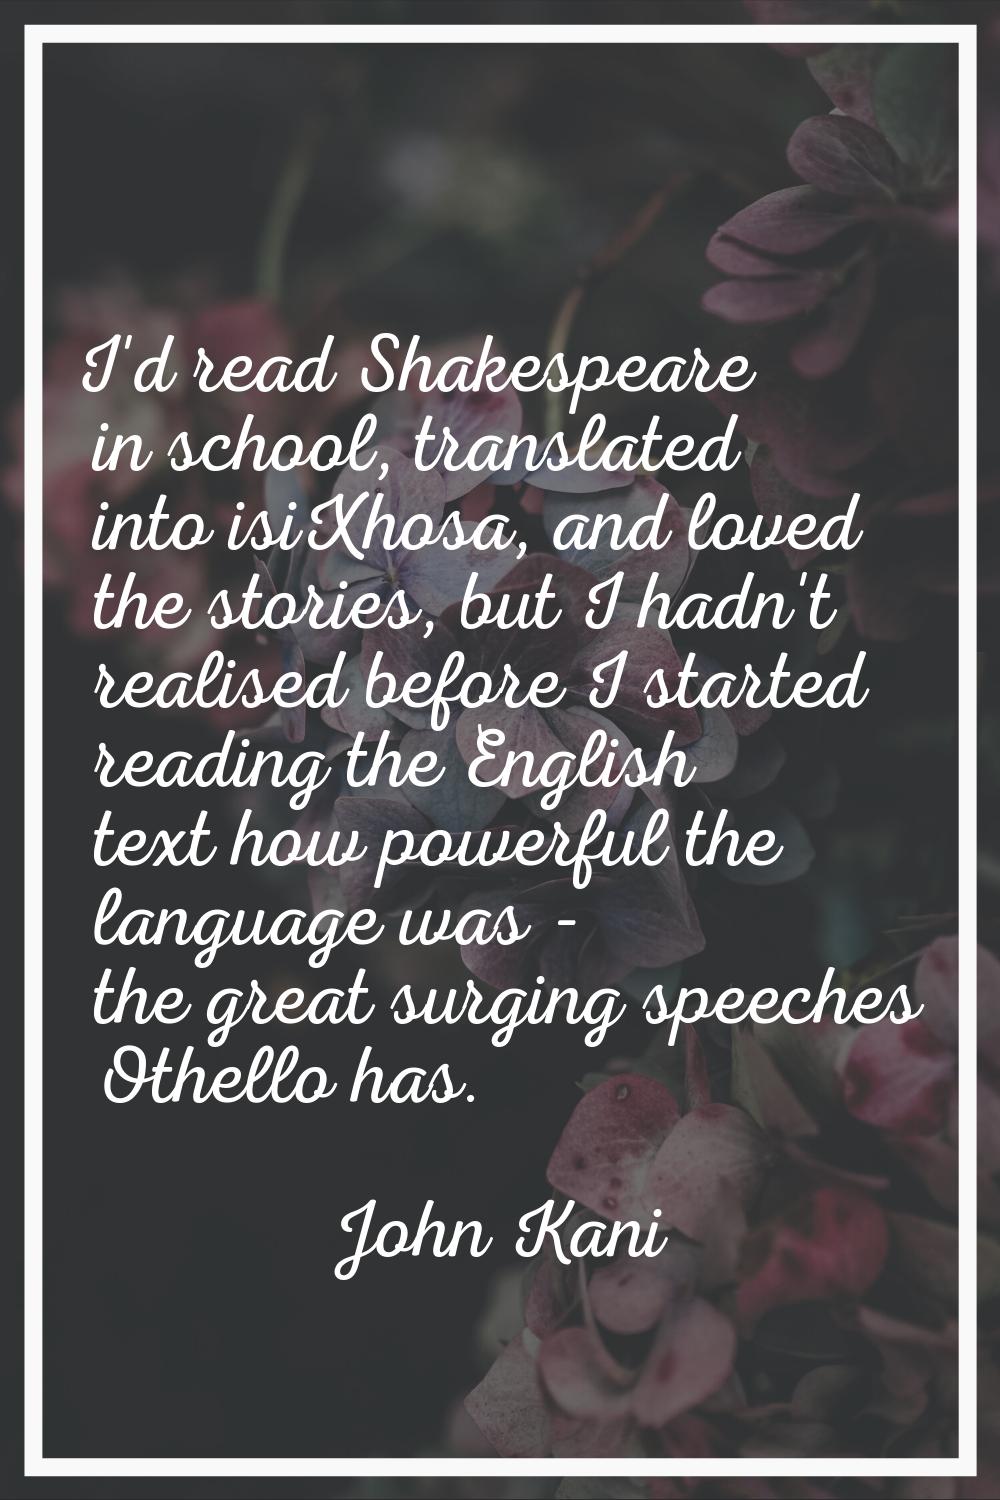 I'd read Shakespeare in school, translated into isiXhosa, and loved the stories, but I hadn't reali